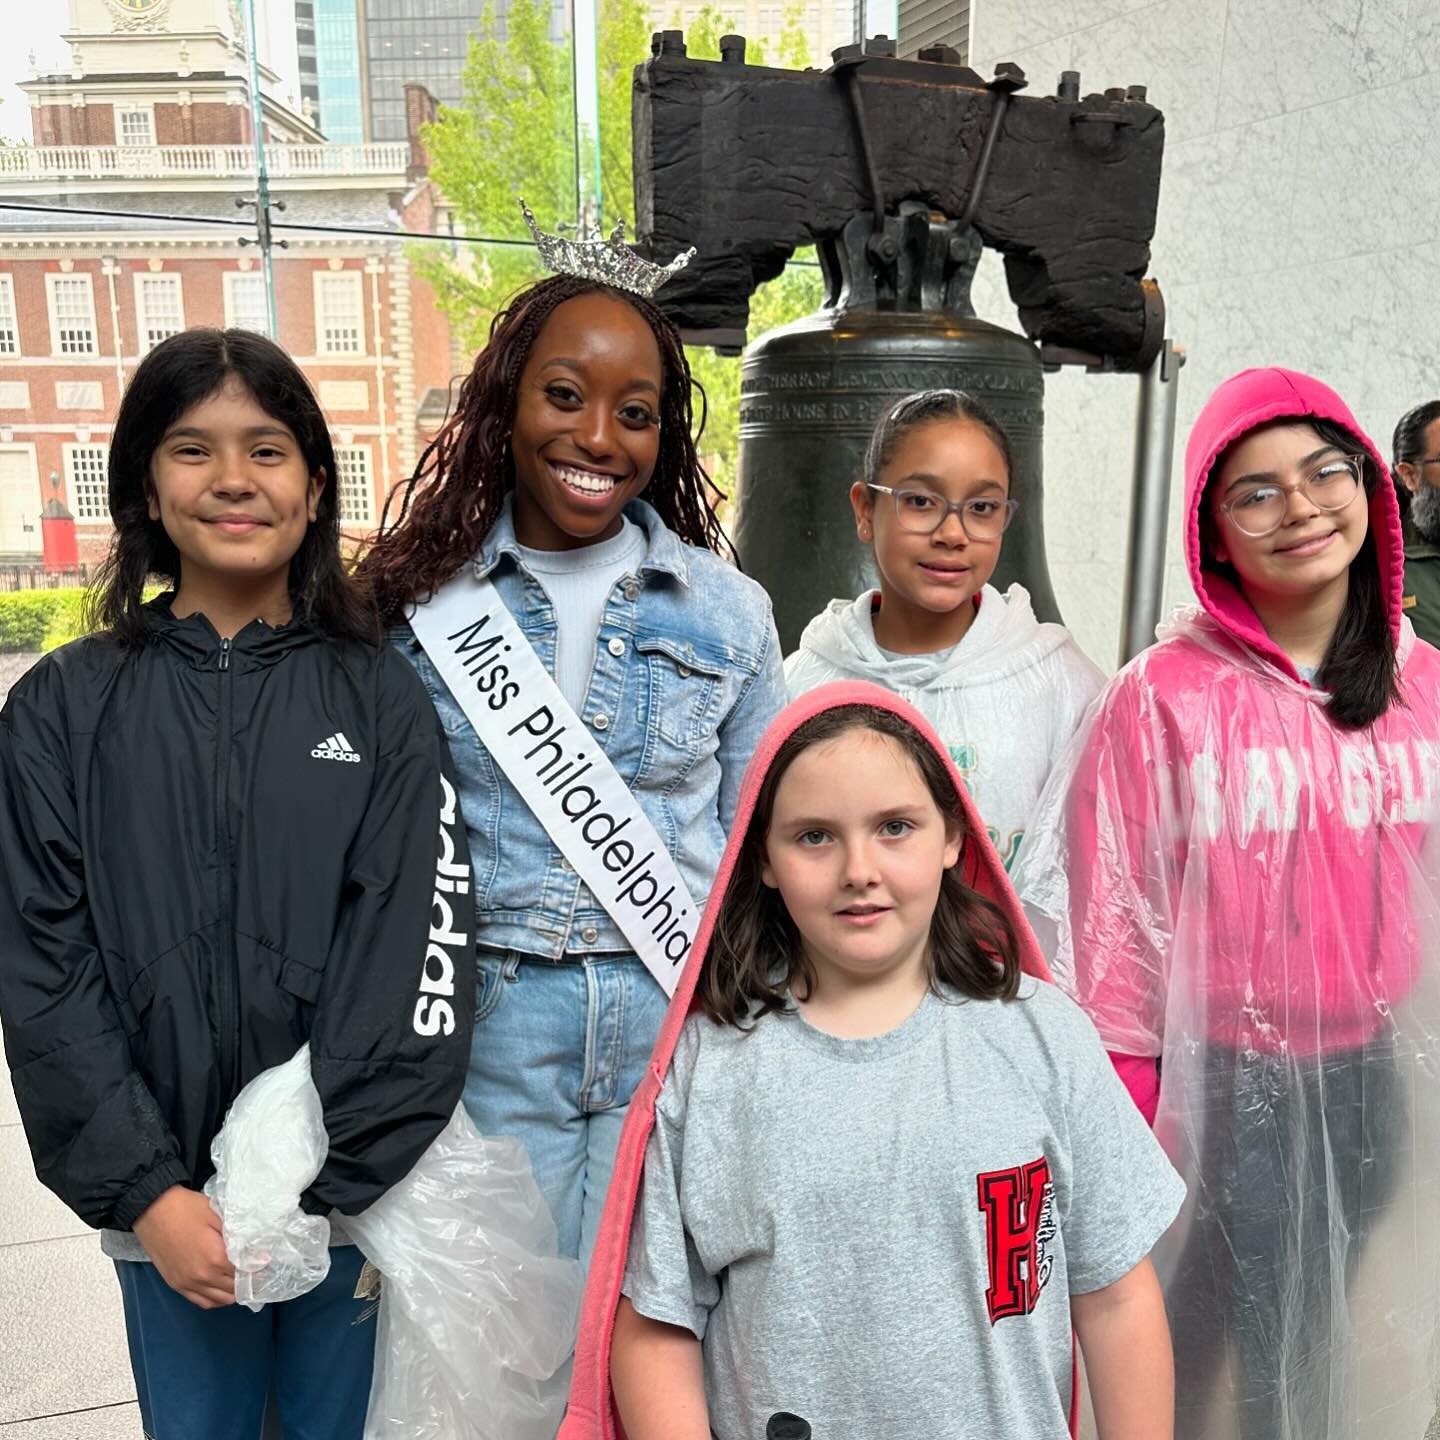 A student asked me if it&rsquo;s always rainy in Philadelphia, and I said no, Its always SUNNY in Philadelphia&hellip; just not today! ( Pun intended💕)

I had the most amazing day with the students from Hamilton Elementary in Lancaster, PA! Thank yo